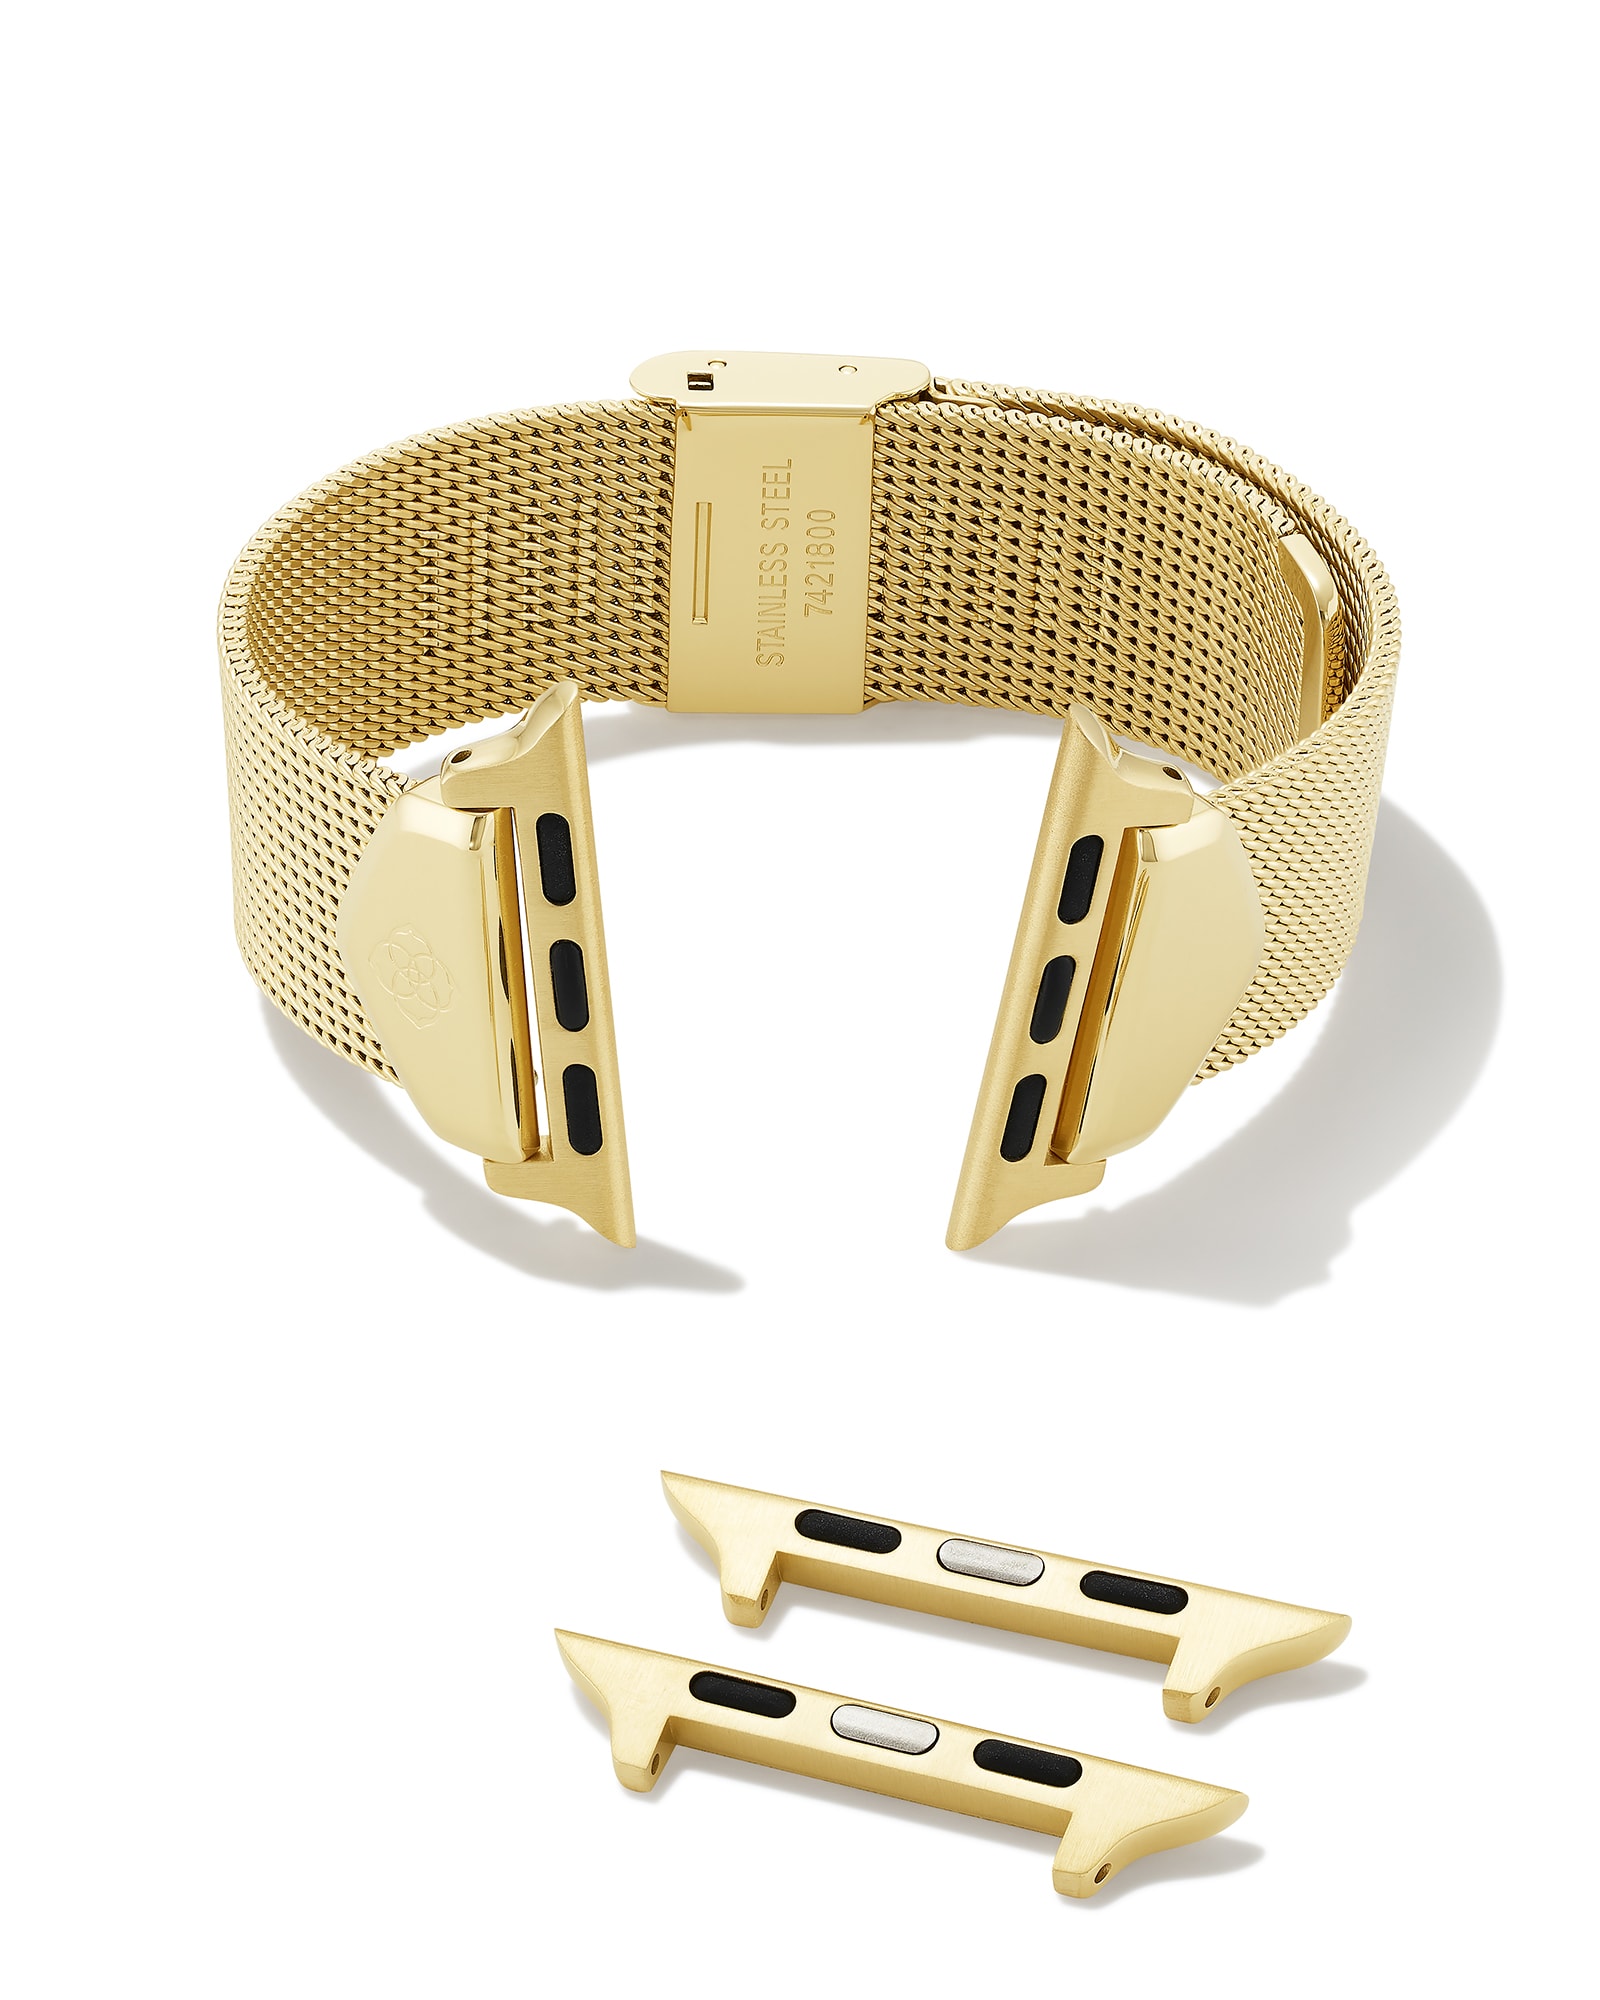 Mia Mesh Watch Band in Gold Tone Stainless Steel